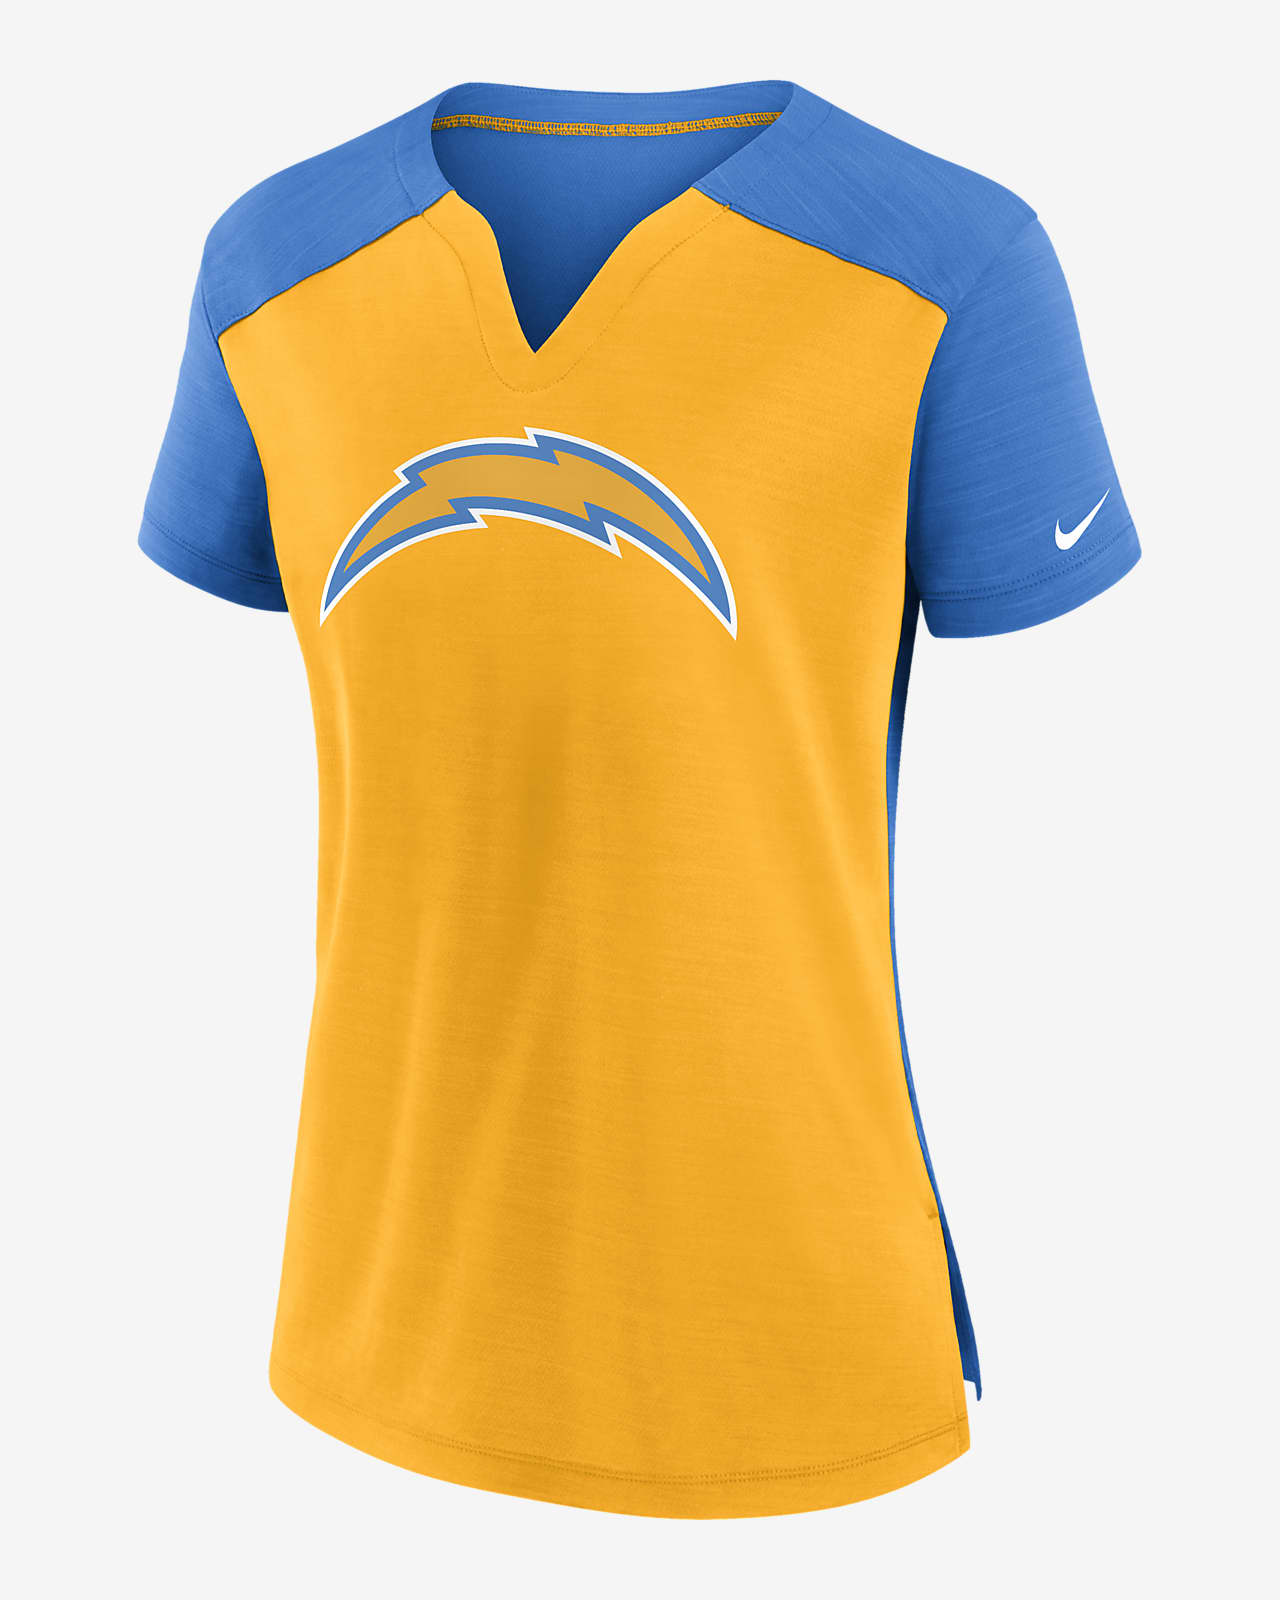 Nike Dri-FIT Exceed (NFL Los Angeles Chargers) Women's T-Shirt